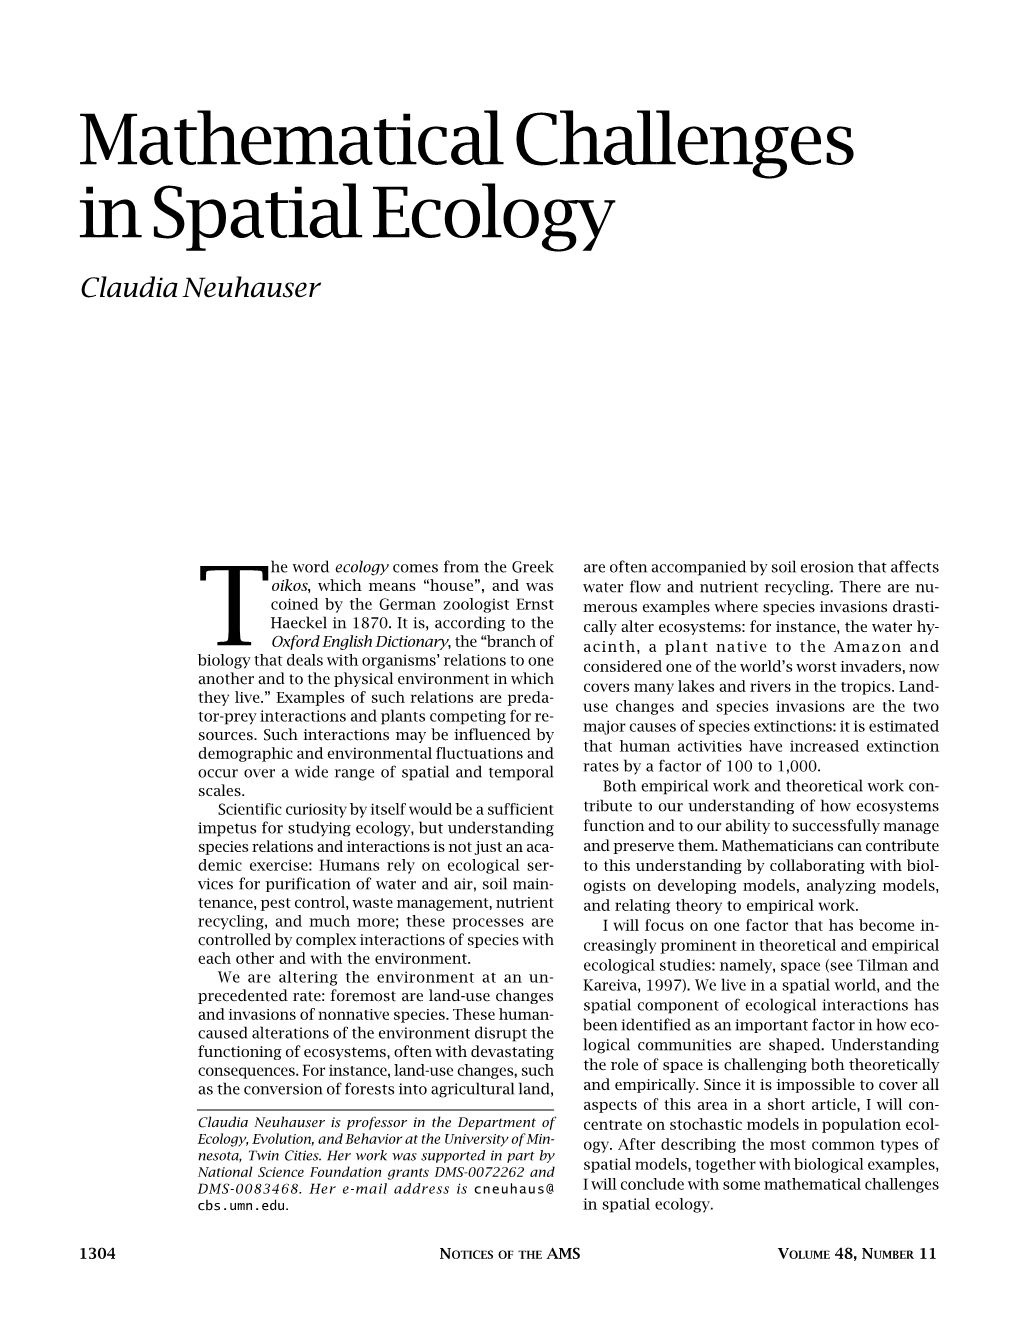 Mathematical Challenges in Spatial Ecology, Volume 48, Number 11